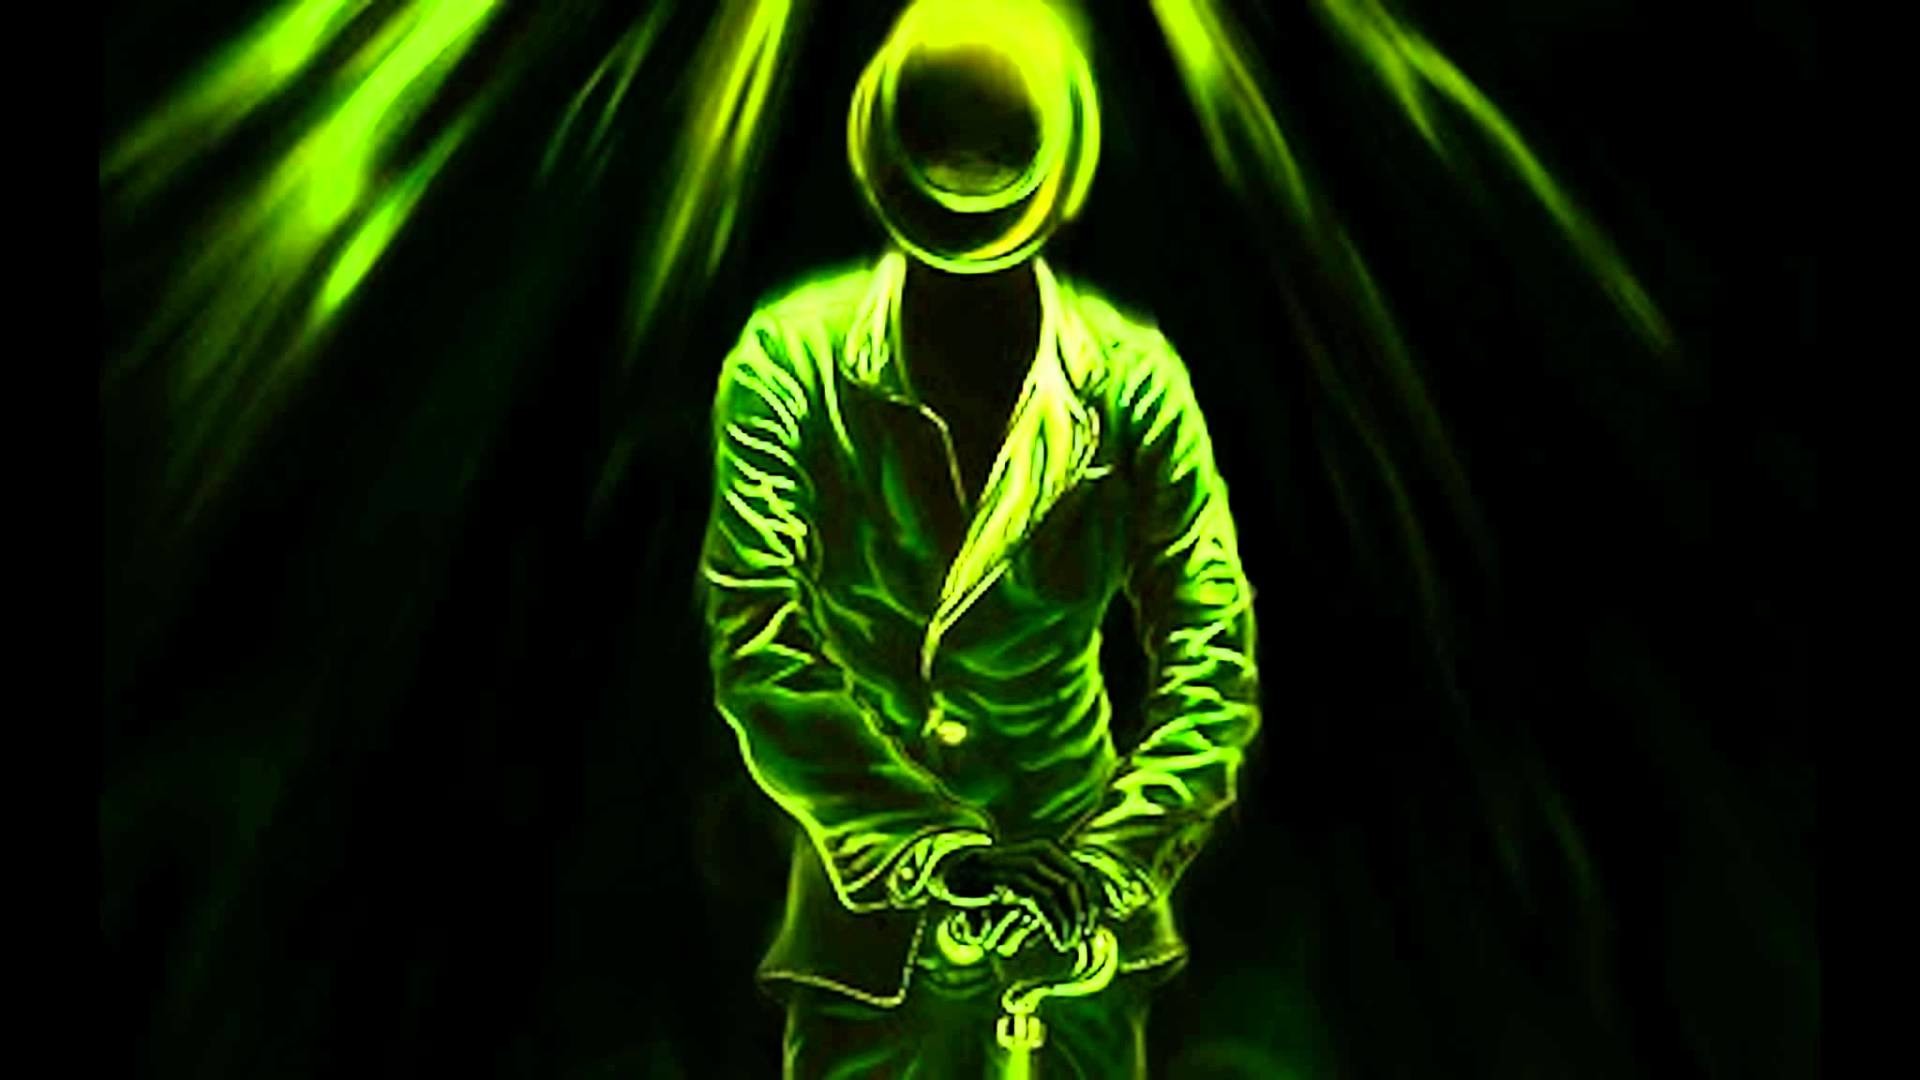 1920x1080 Displaying 7> Images For - The Riddler Wallpaper Hd..